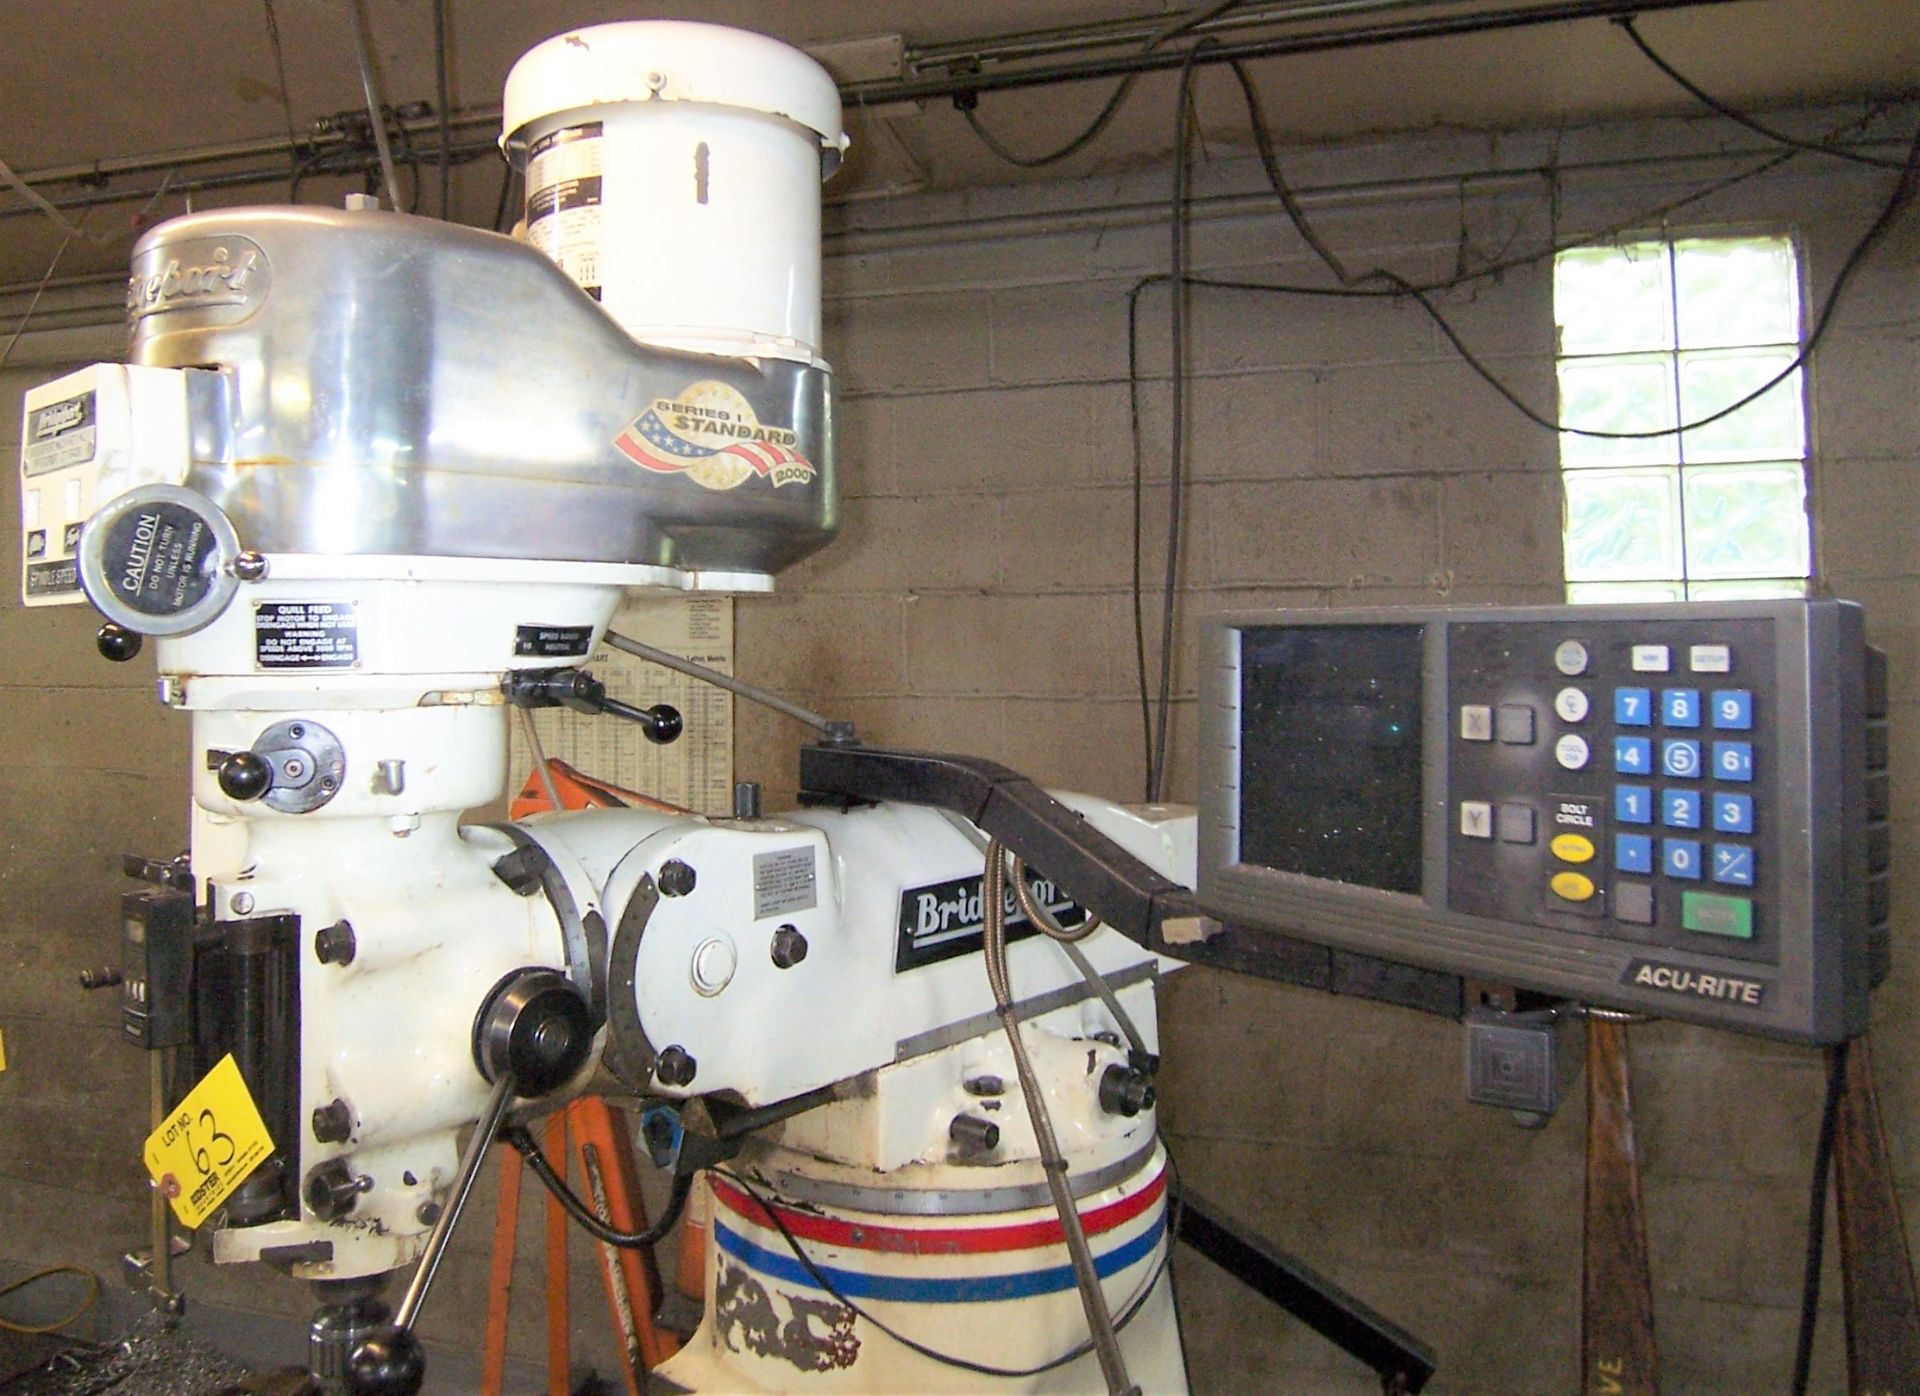 BRIDGEPORT 2HP VERTICAL MILLING MACHINE WITH 9" X 48" POWER FEED TABLE, SPINDLE SPEEDS TO 4,200 - Image 4 of 4